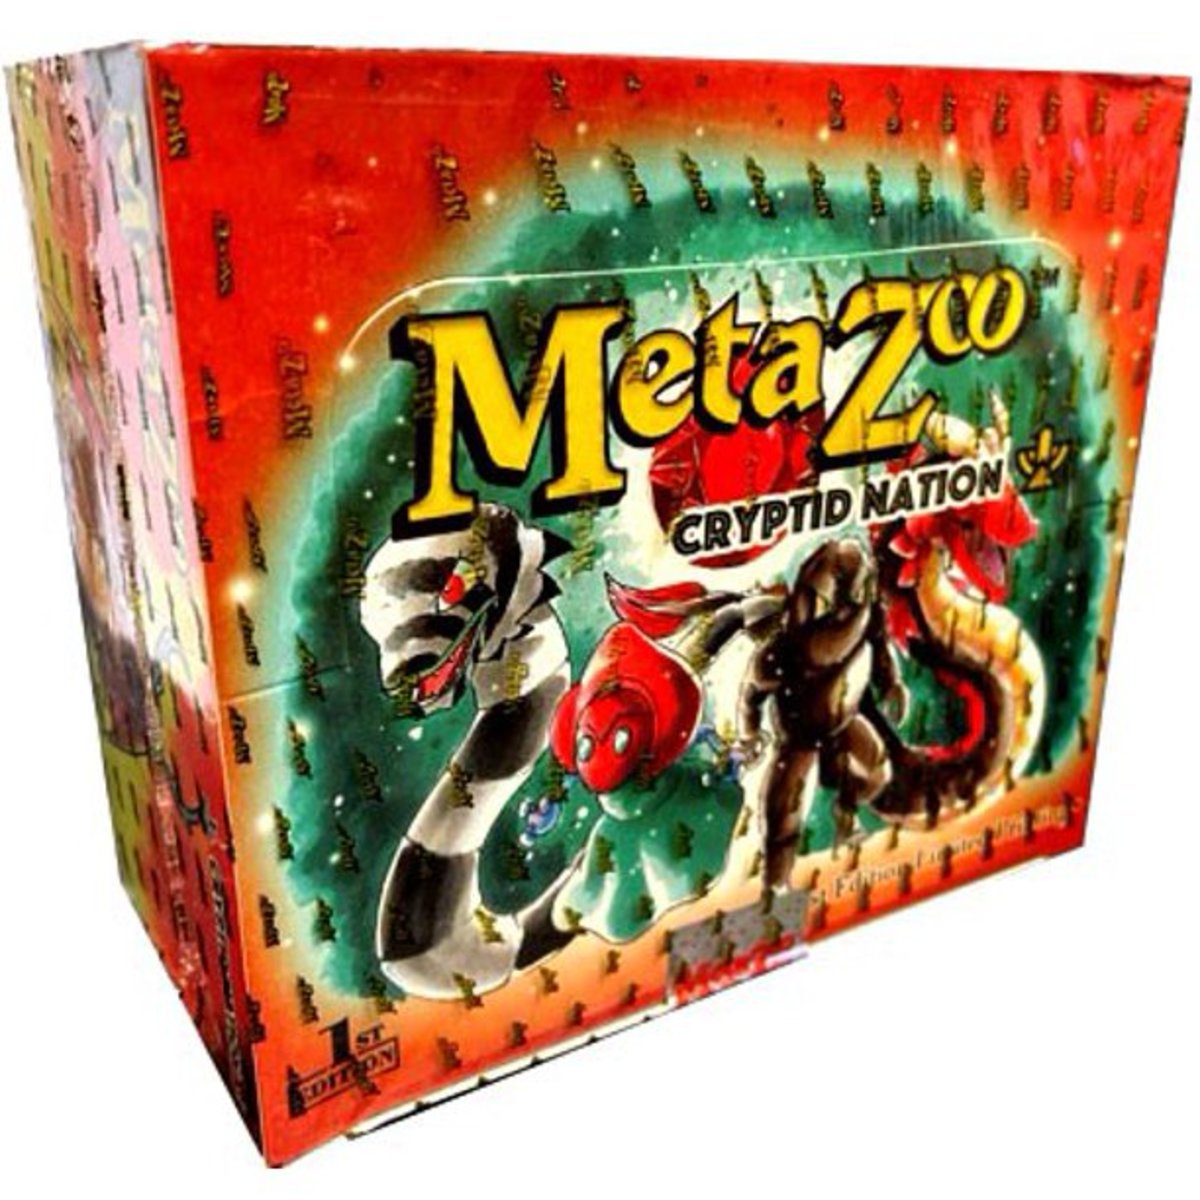 Investing in TCG: What Is MetaZoo, and Is It a Good Investment?